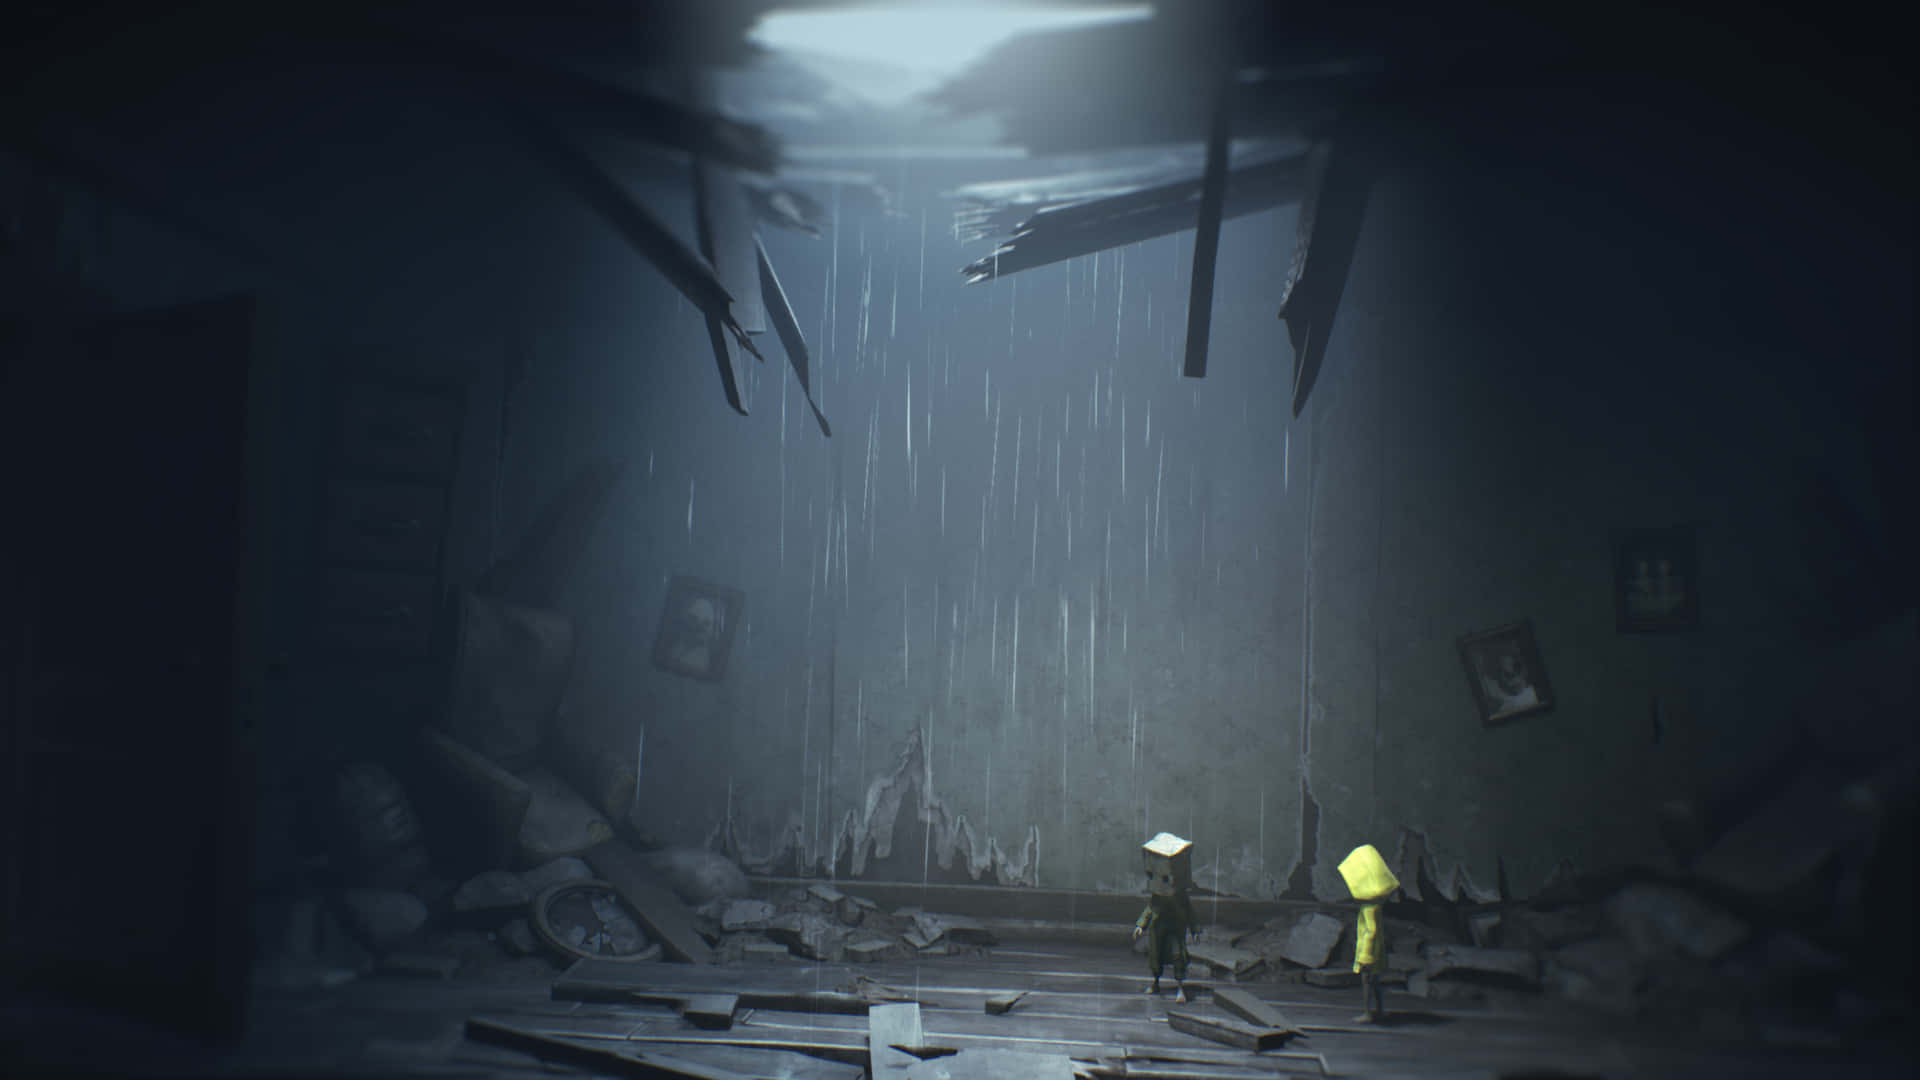 An eerie and gripping tale of Little Nightmares awaits Wallpaper